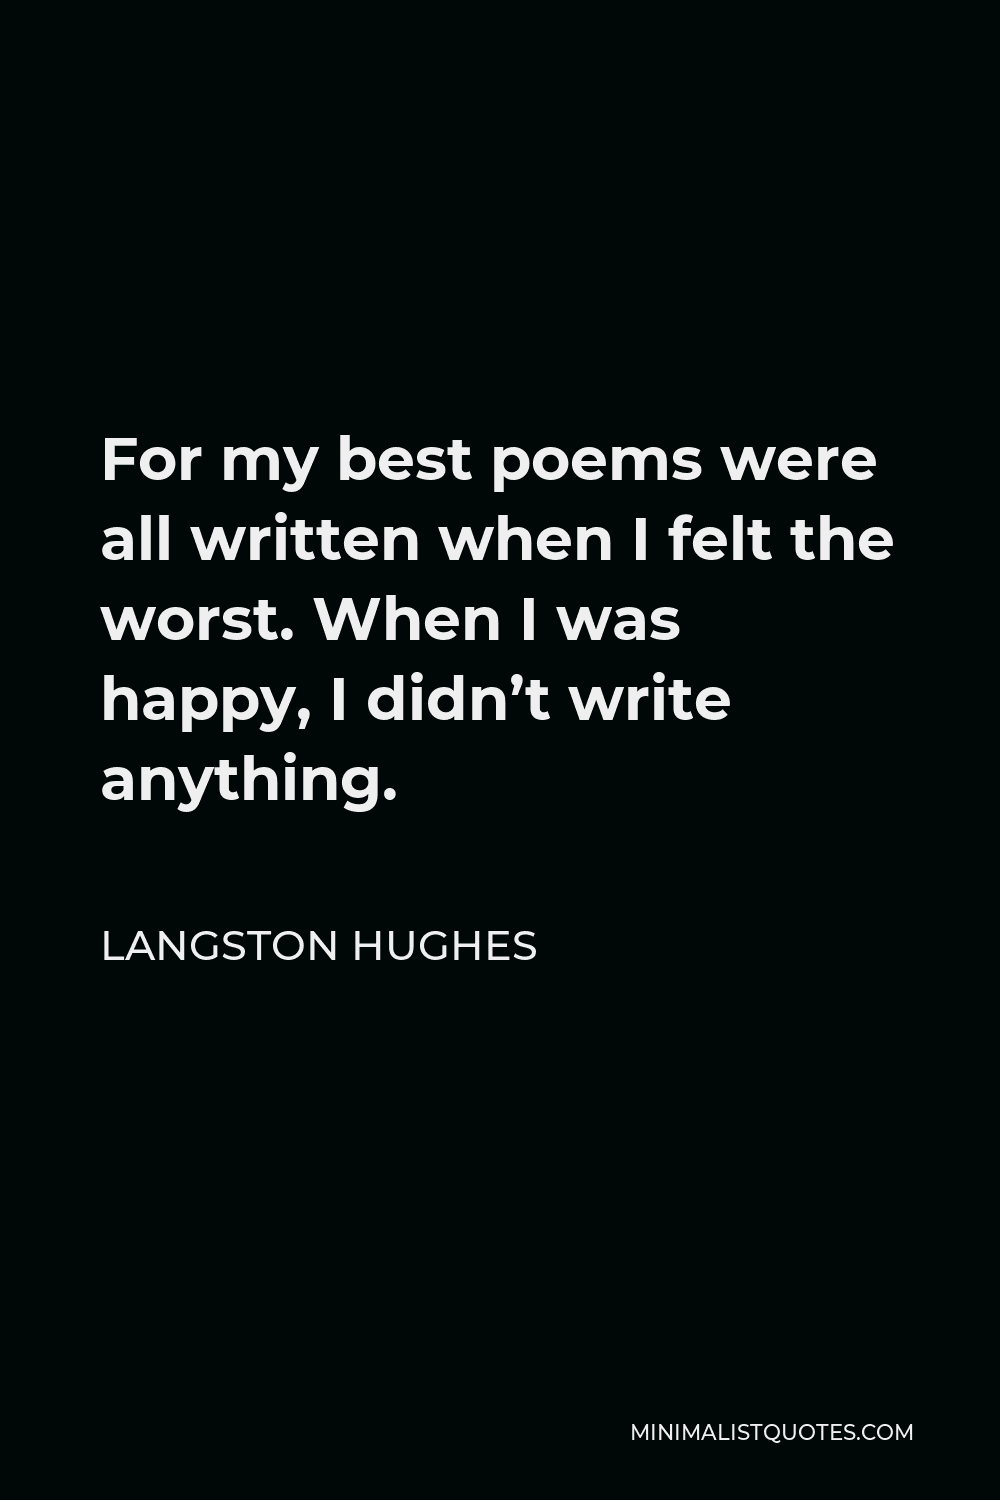 Langston Hughes Quote - For my best poems were all written when I felt the worst. When I was happy, I didn’t write anything.